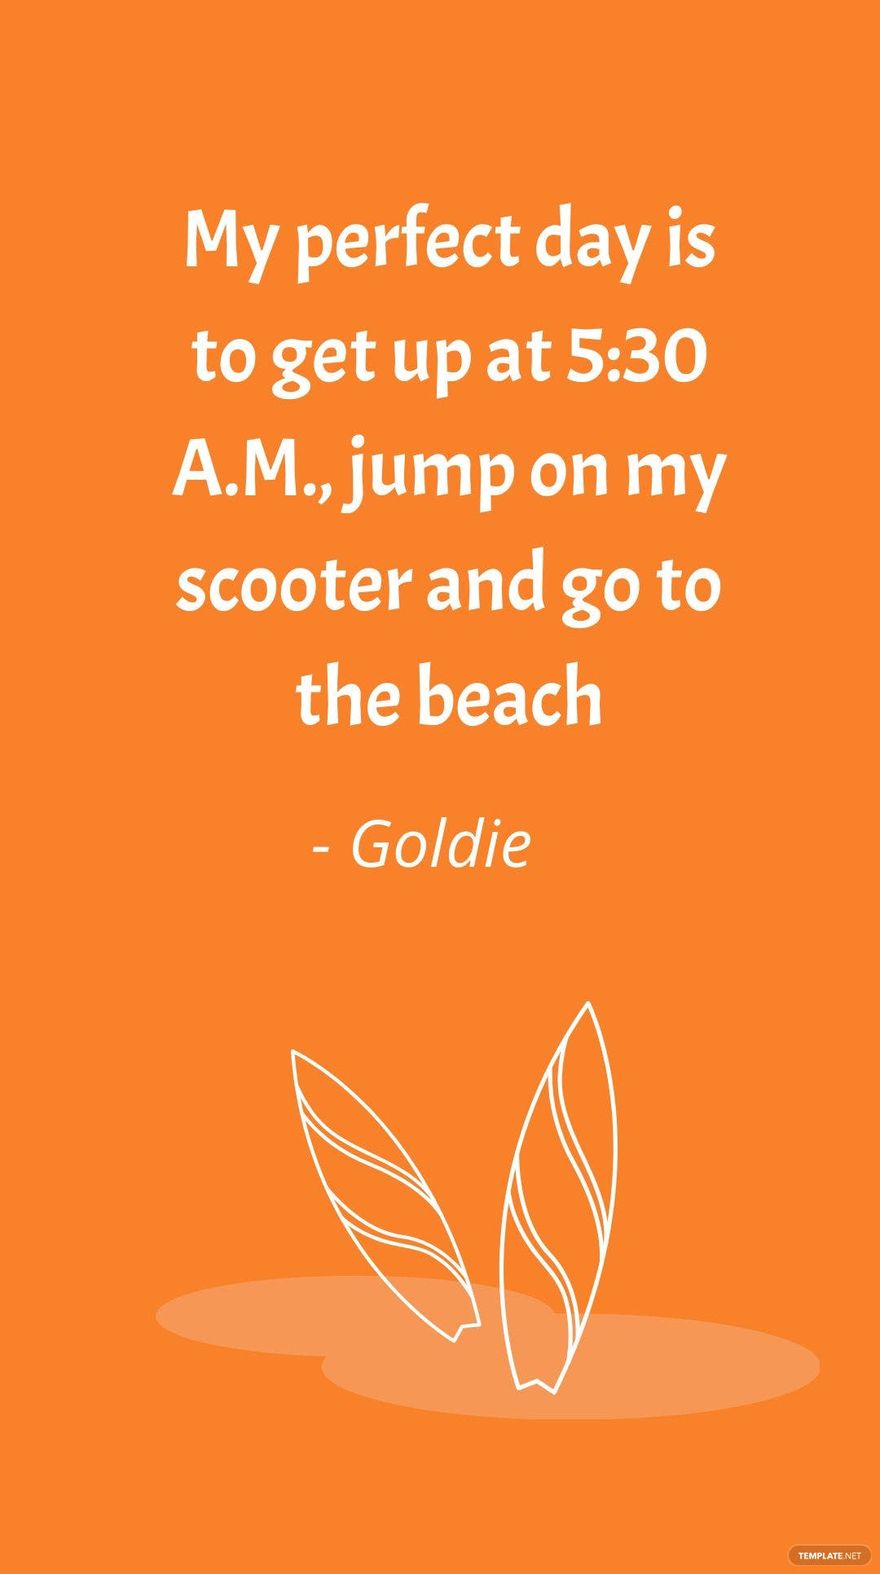 Free Goldie - My perfect day is to get up at 5:30 A.M., jump on my scooter and go to the beach in JPG